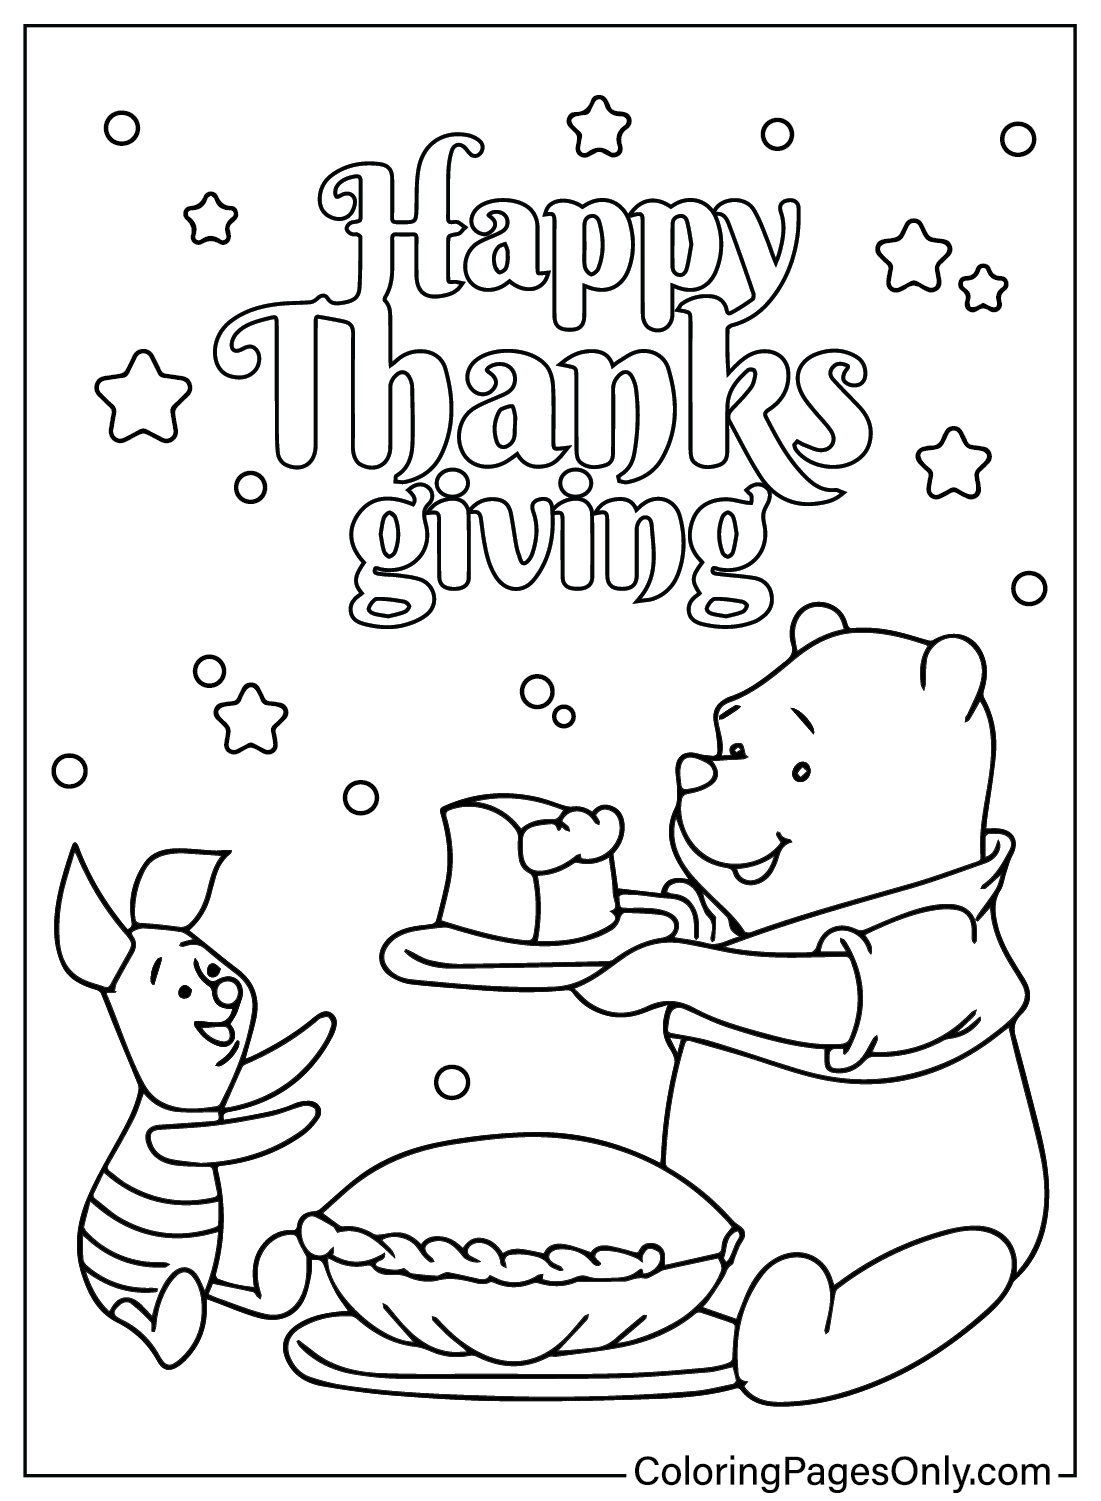 Pooh and Piglet Thanksgiving Coloring Page from Disney Thanksgiving